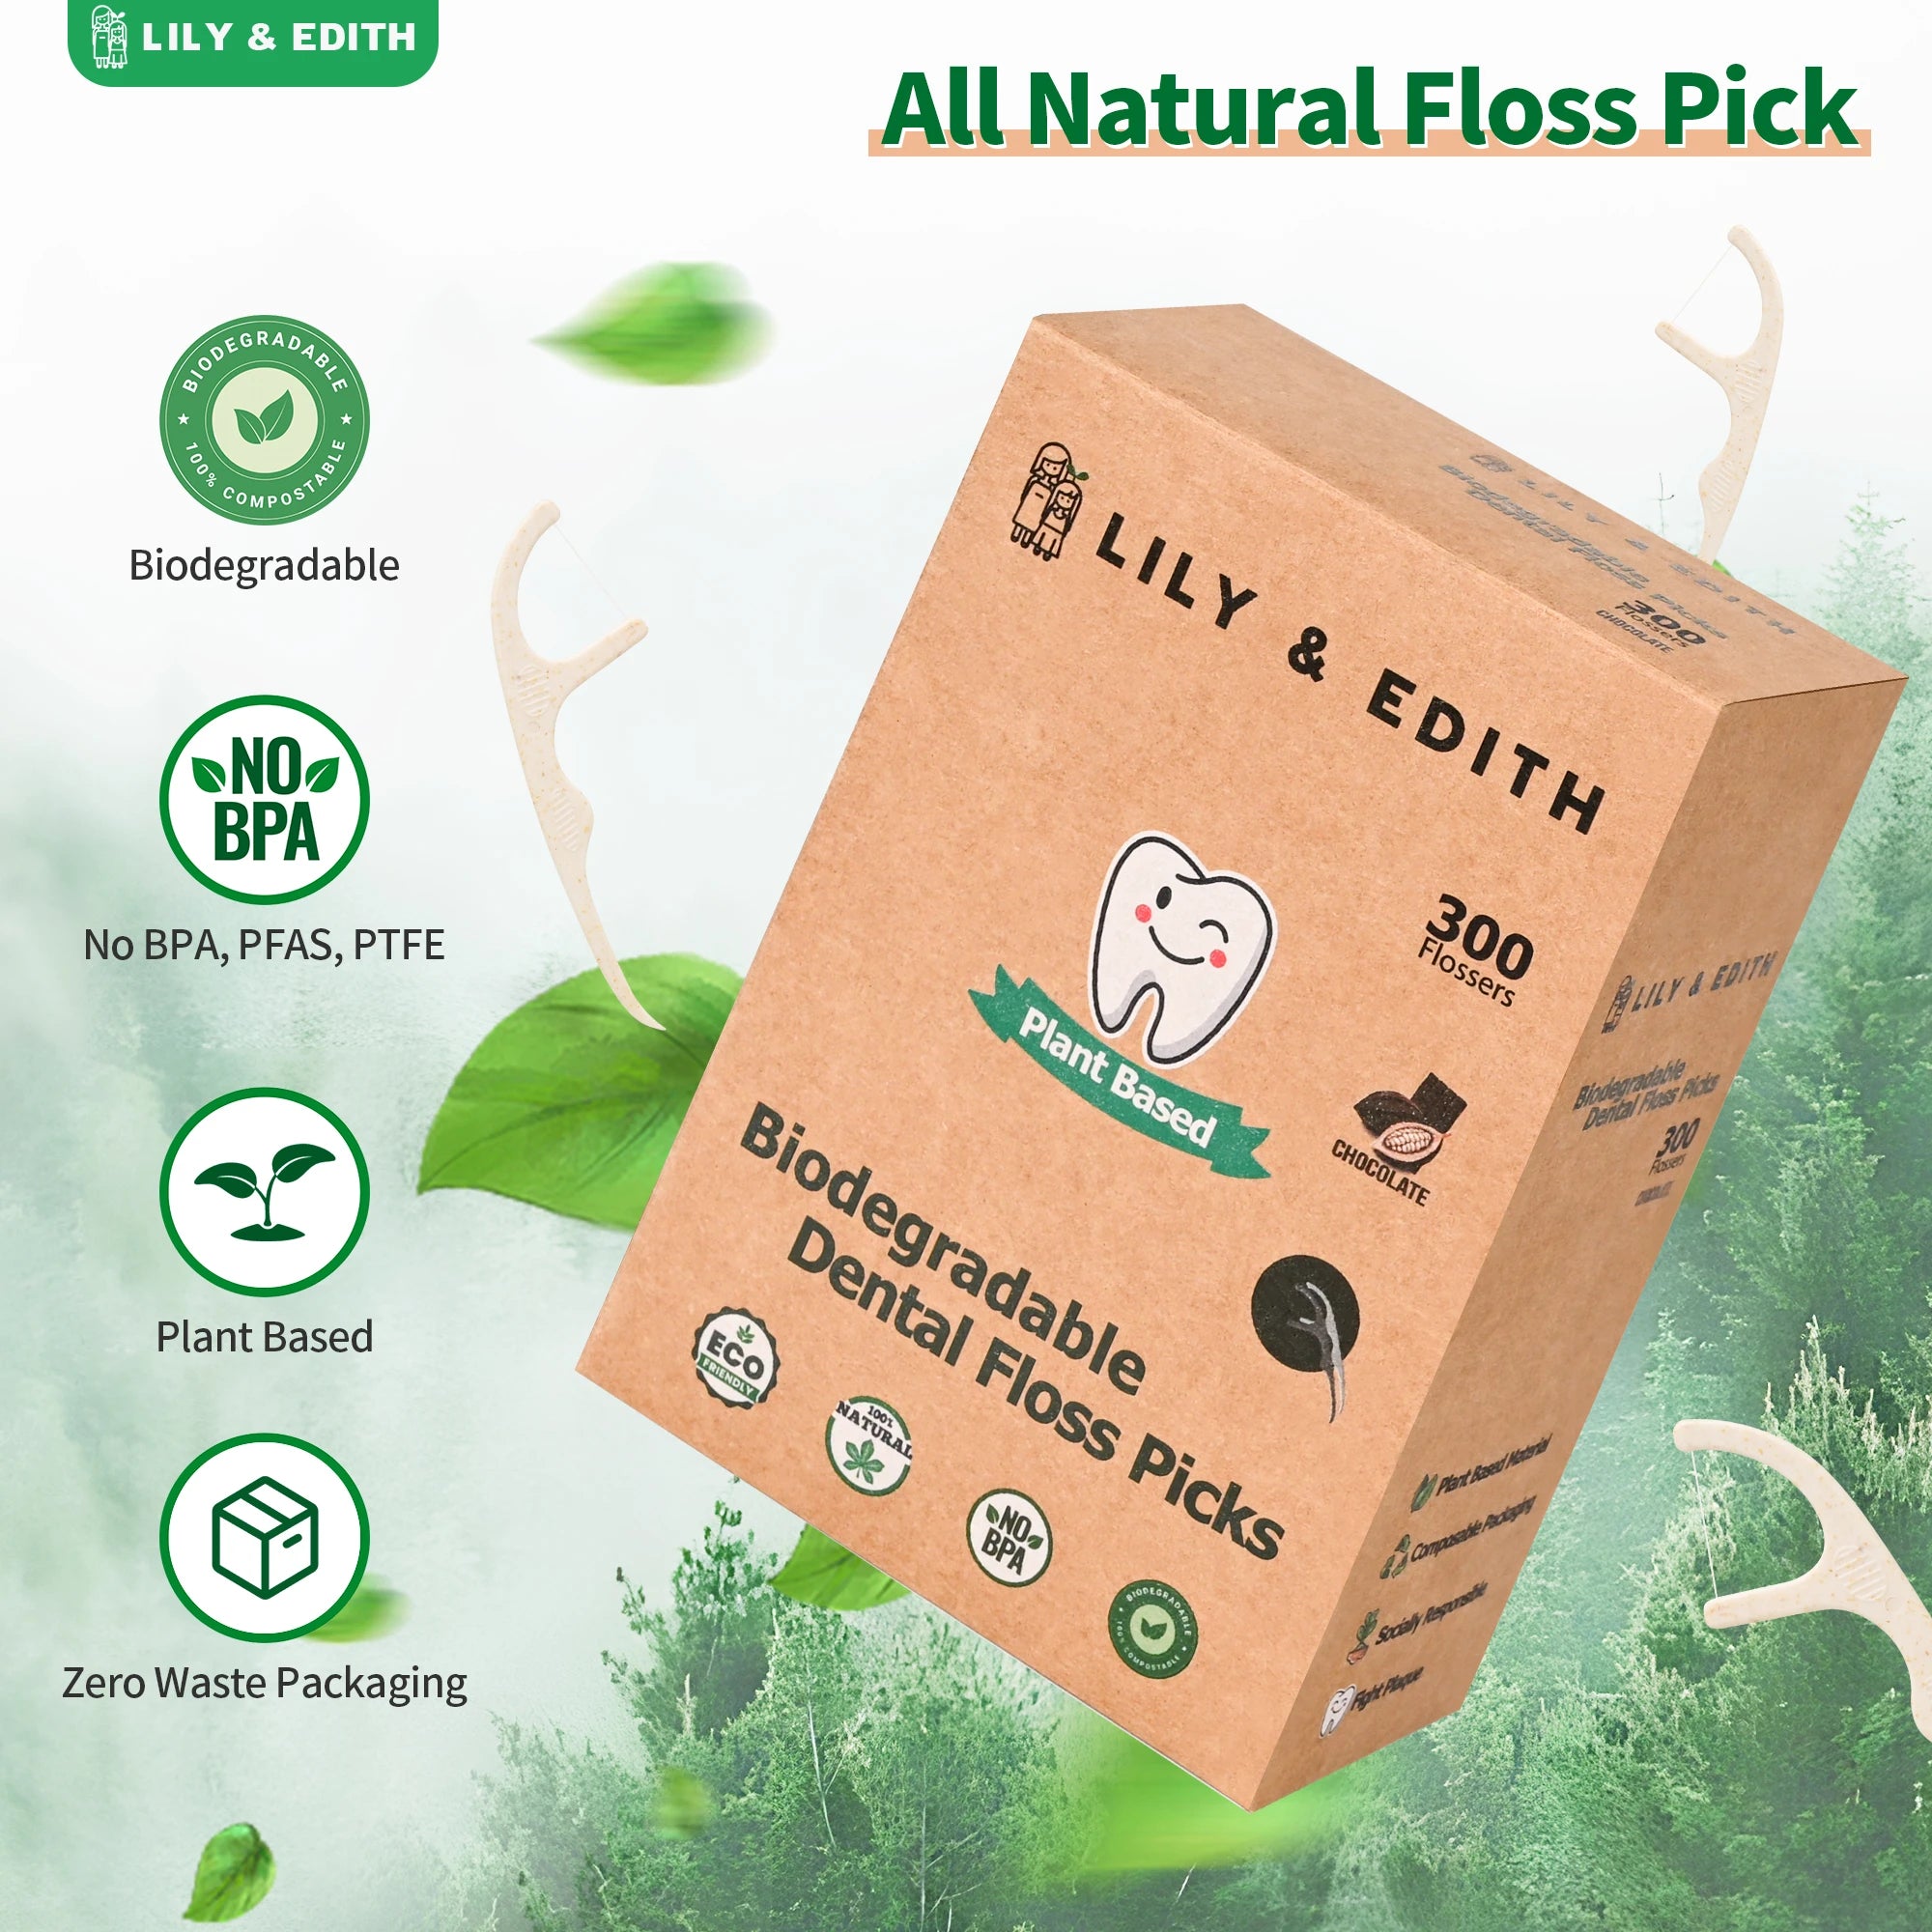 biodegradable flossers